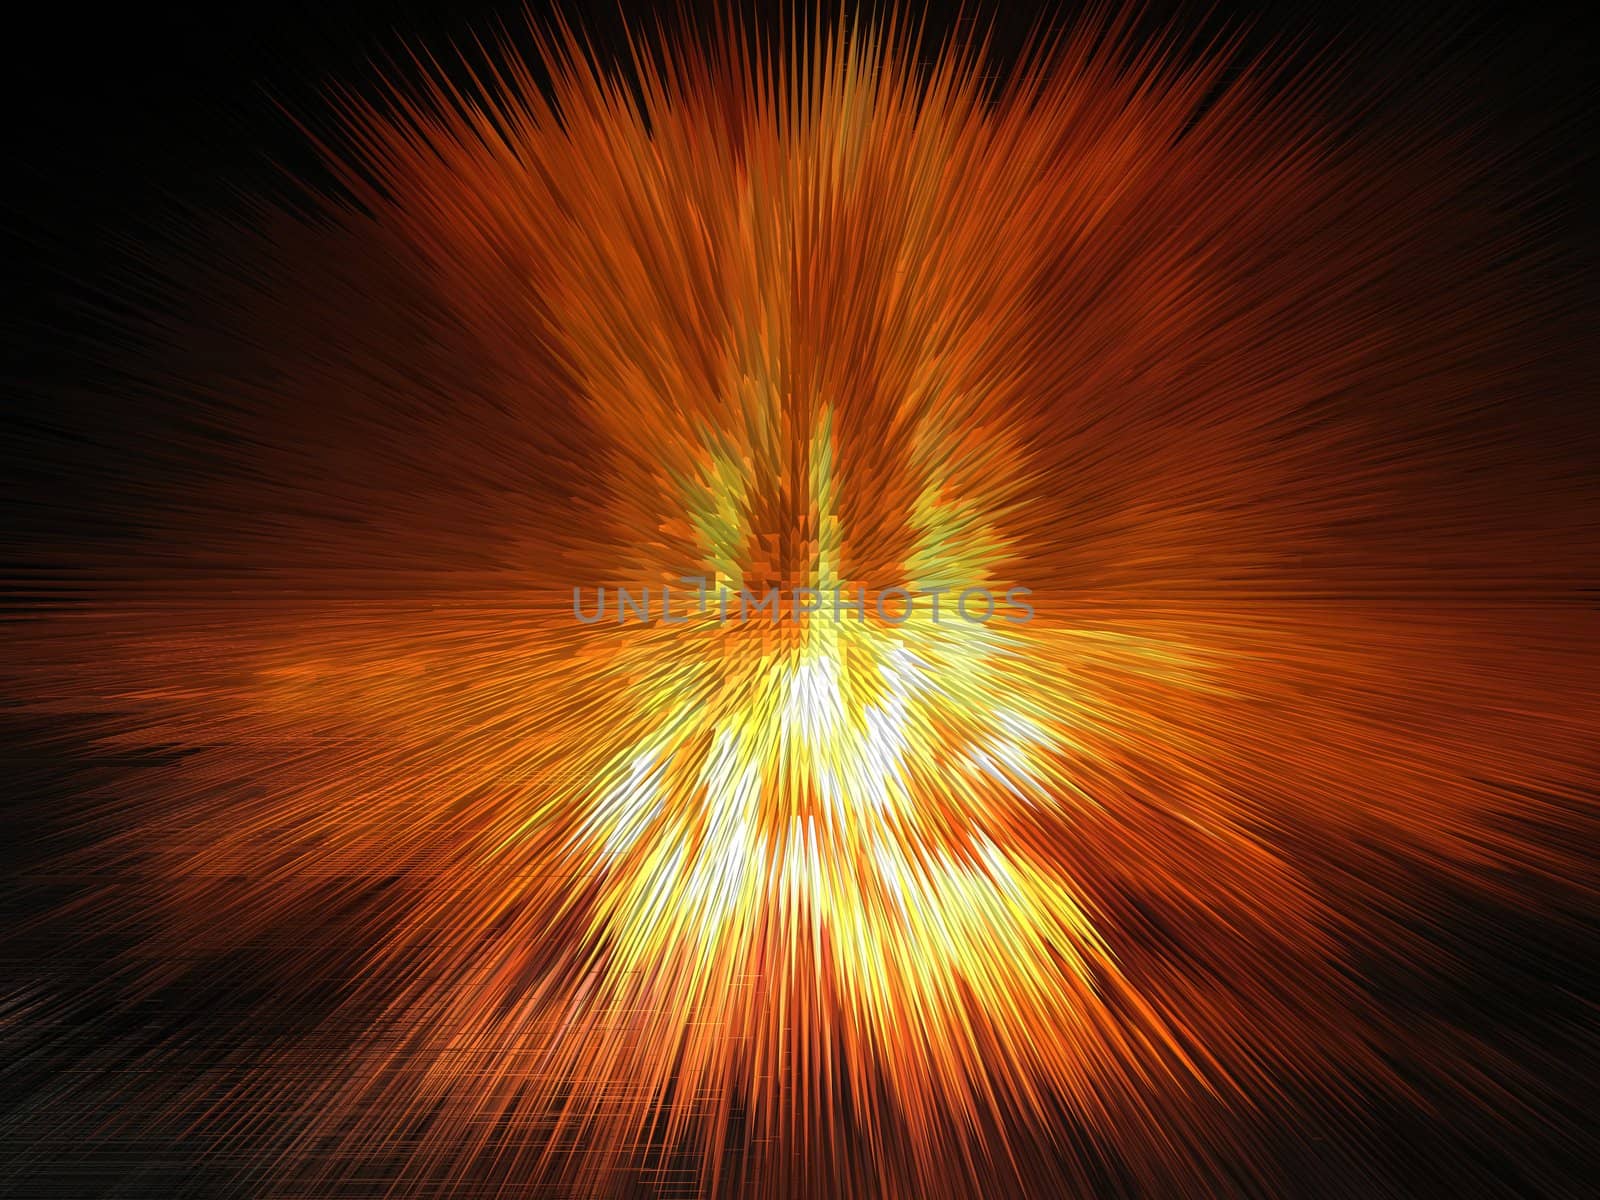 Bright and powerful fire explosion in the space